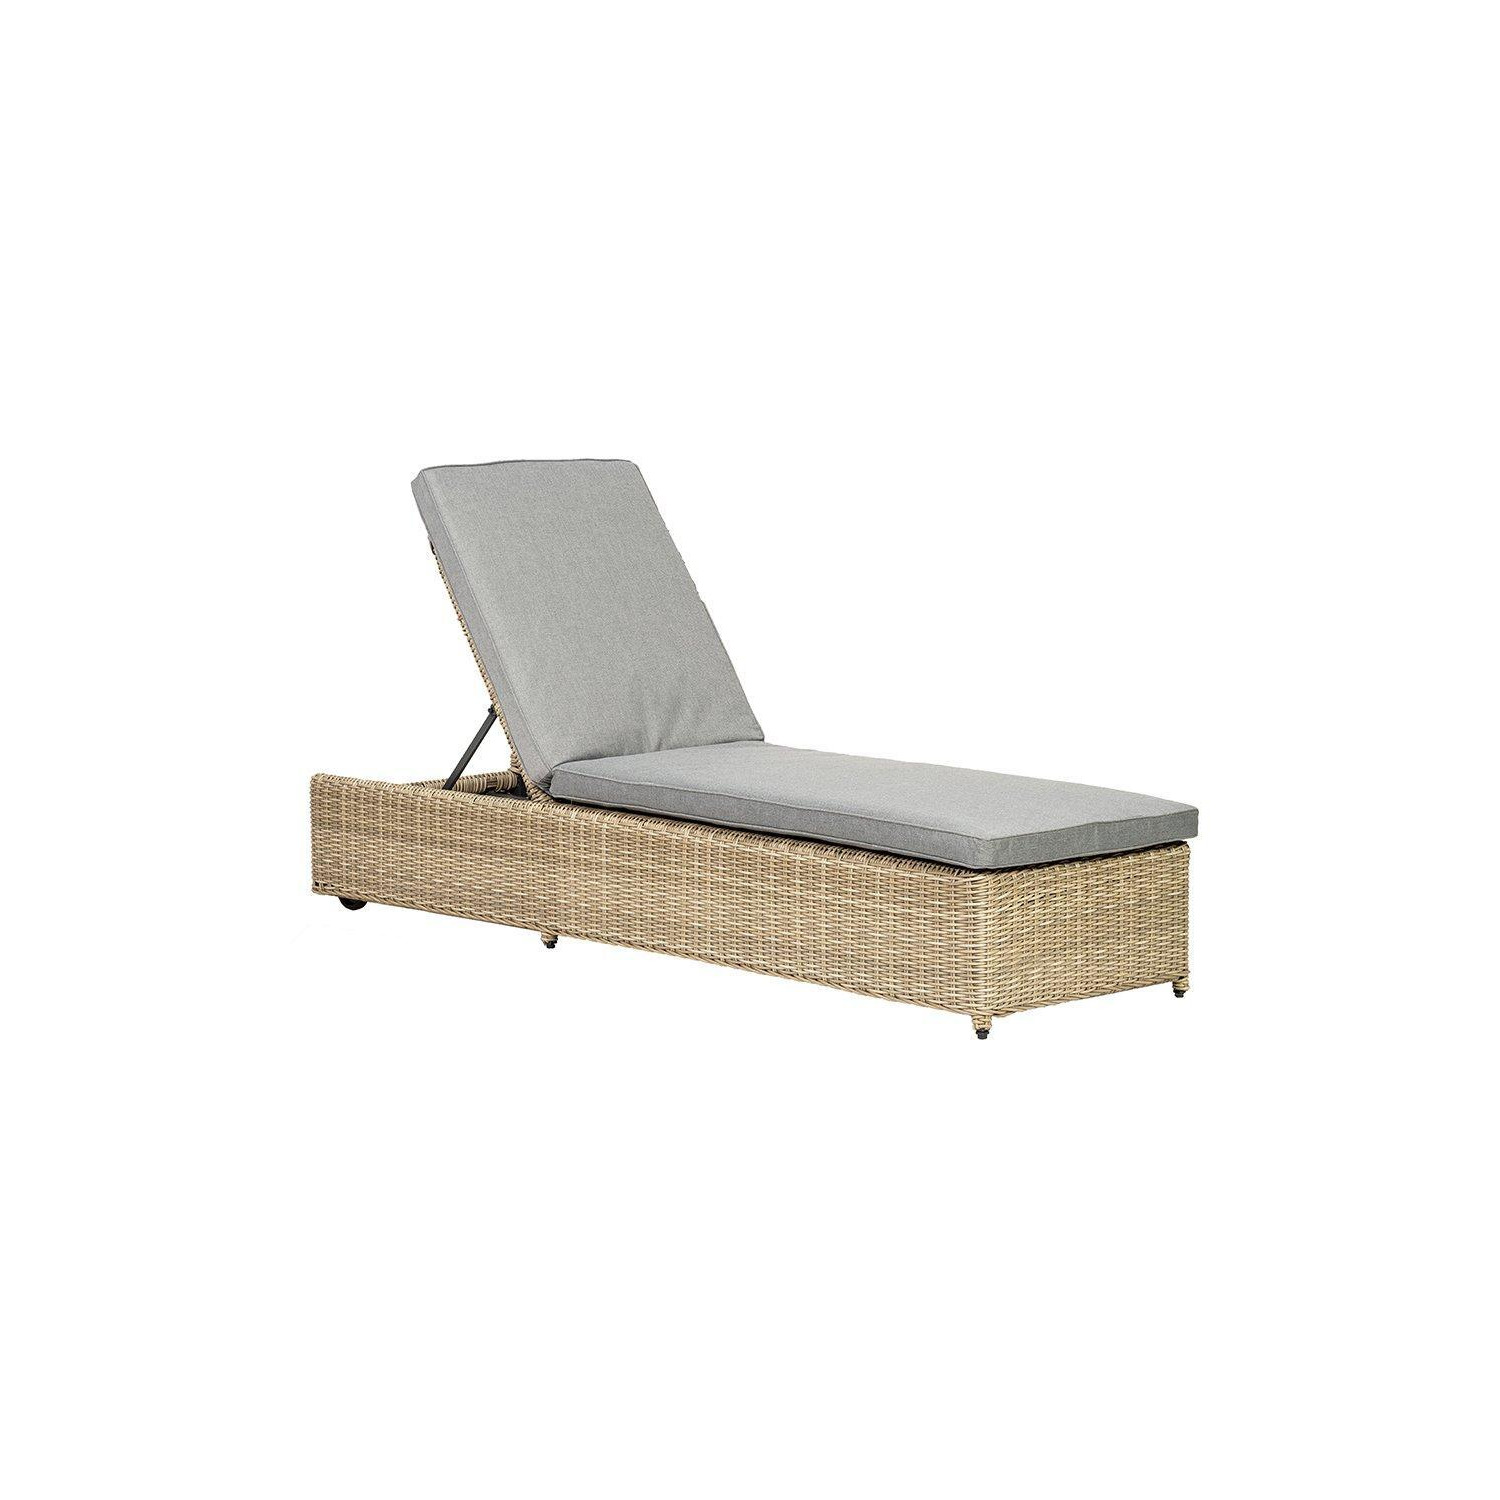 WENTWORTH Sunlounger with adjustable back - image 1